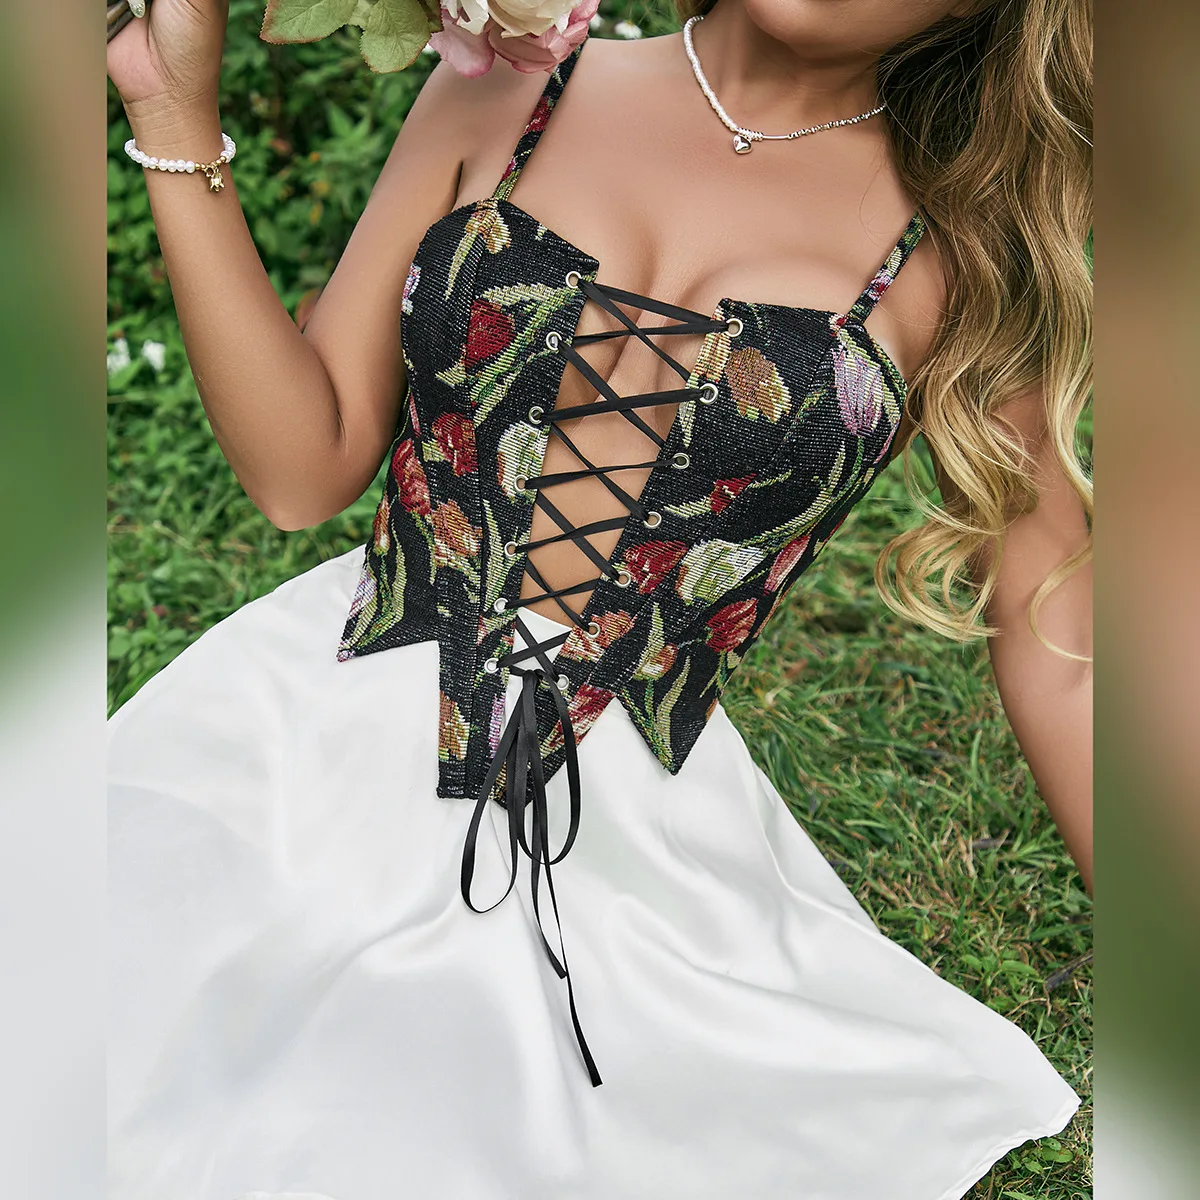 

French Vintage Corset Tops Sexy Floral Corset Bustier Crop Top Tank Lace Up Camisole For Women Going Out Outfit Clubwear Vest